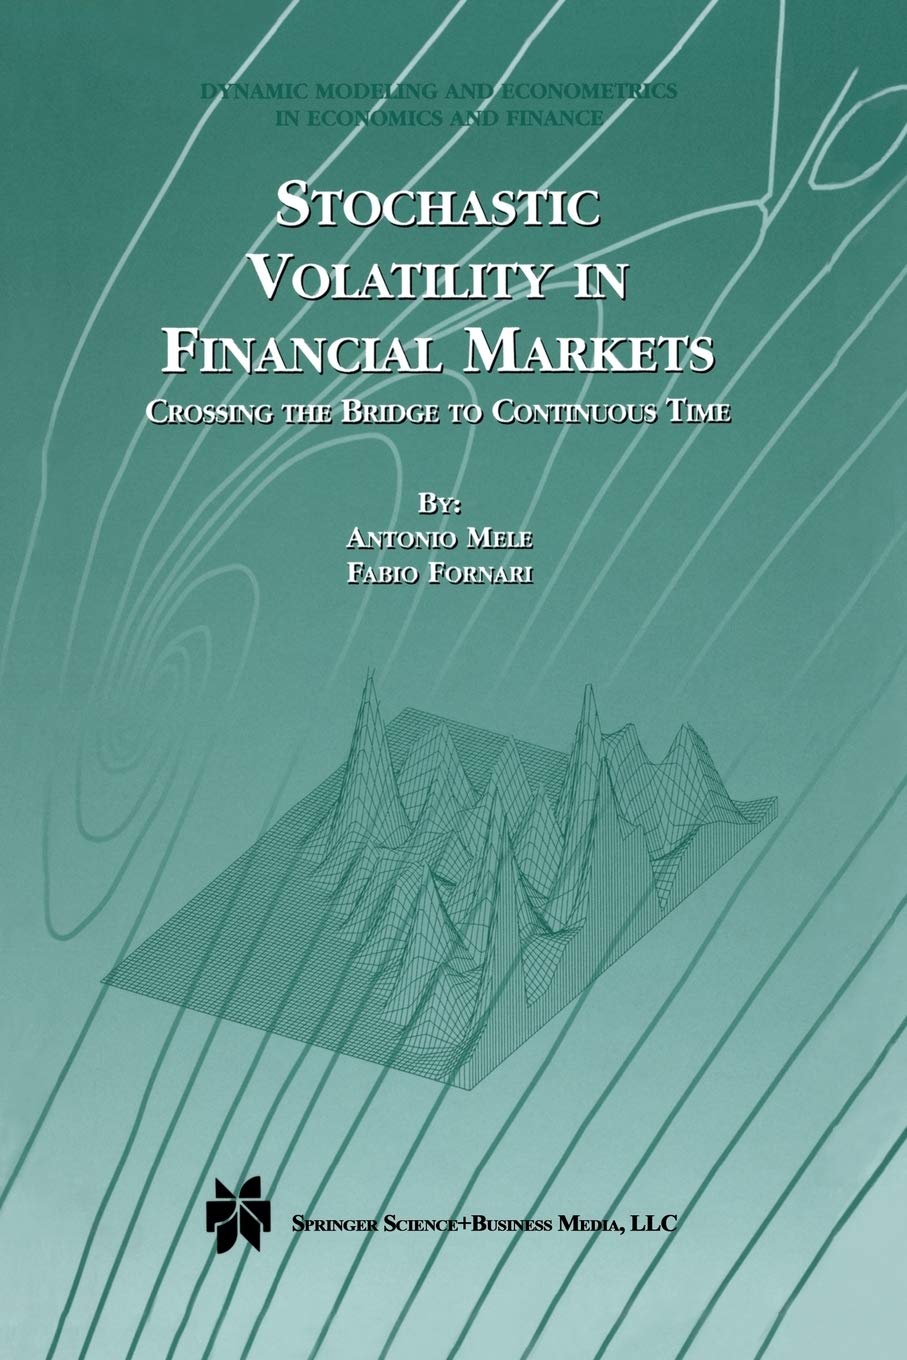 Stochastic Volatility in Financial Markets: Crossing the Bridge to Continuous Time (Dynamic Modeling and Econometrics in Economics and Finance, 3)